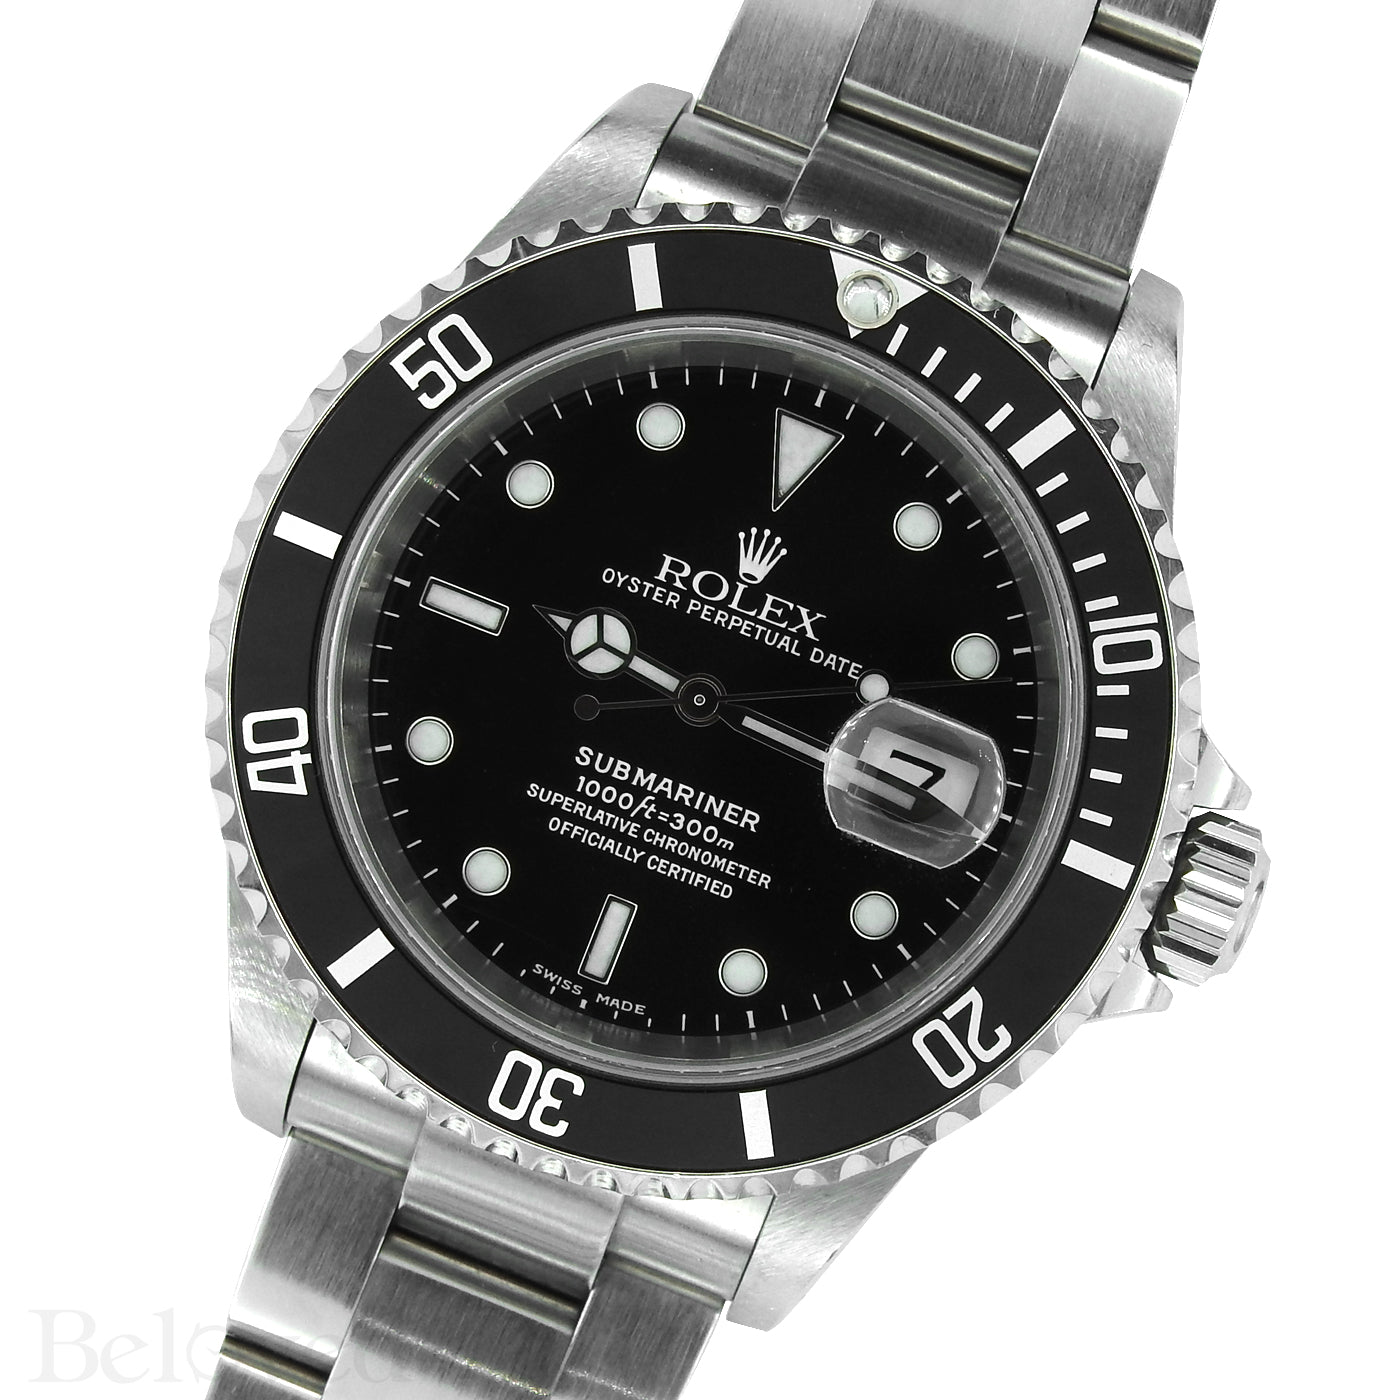 Rolex Submariner 16610 Complete with Rolex One-Year Warranty Paper and Rolex Box Image 3